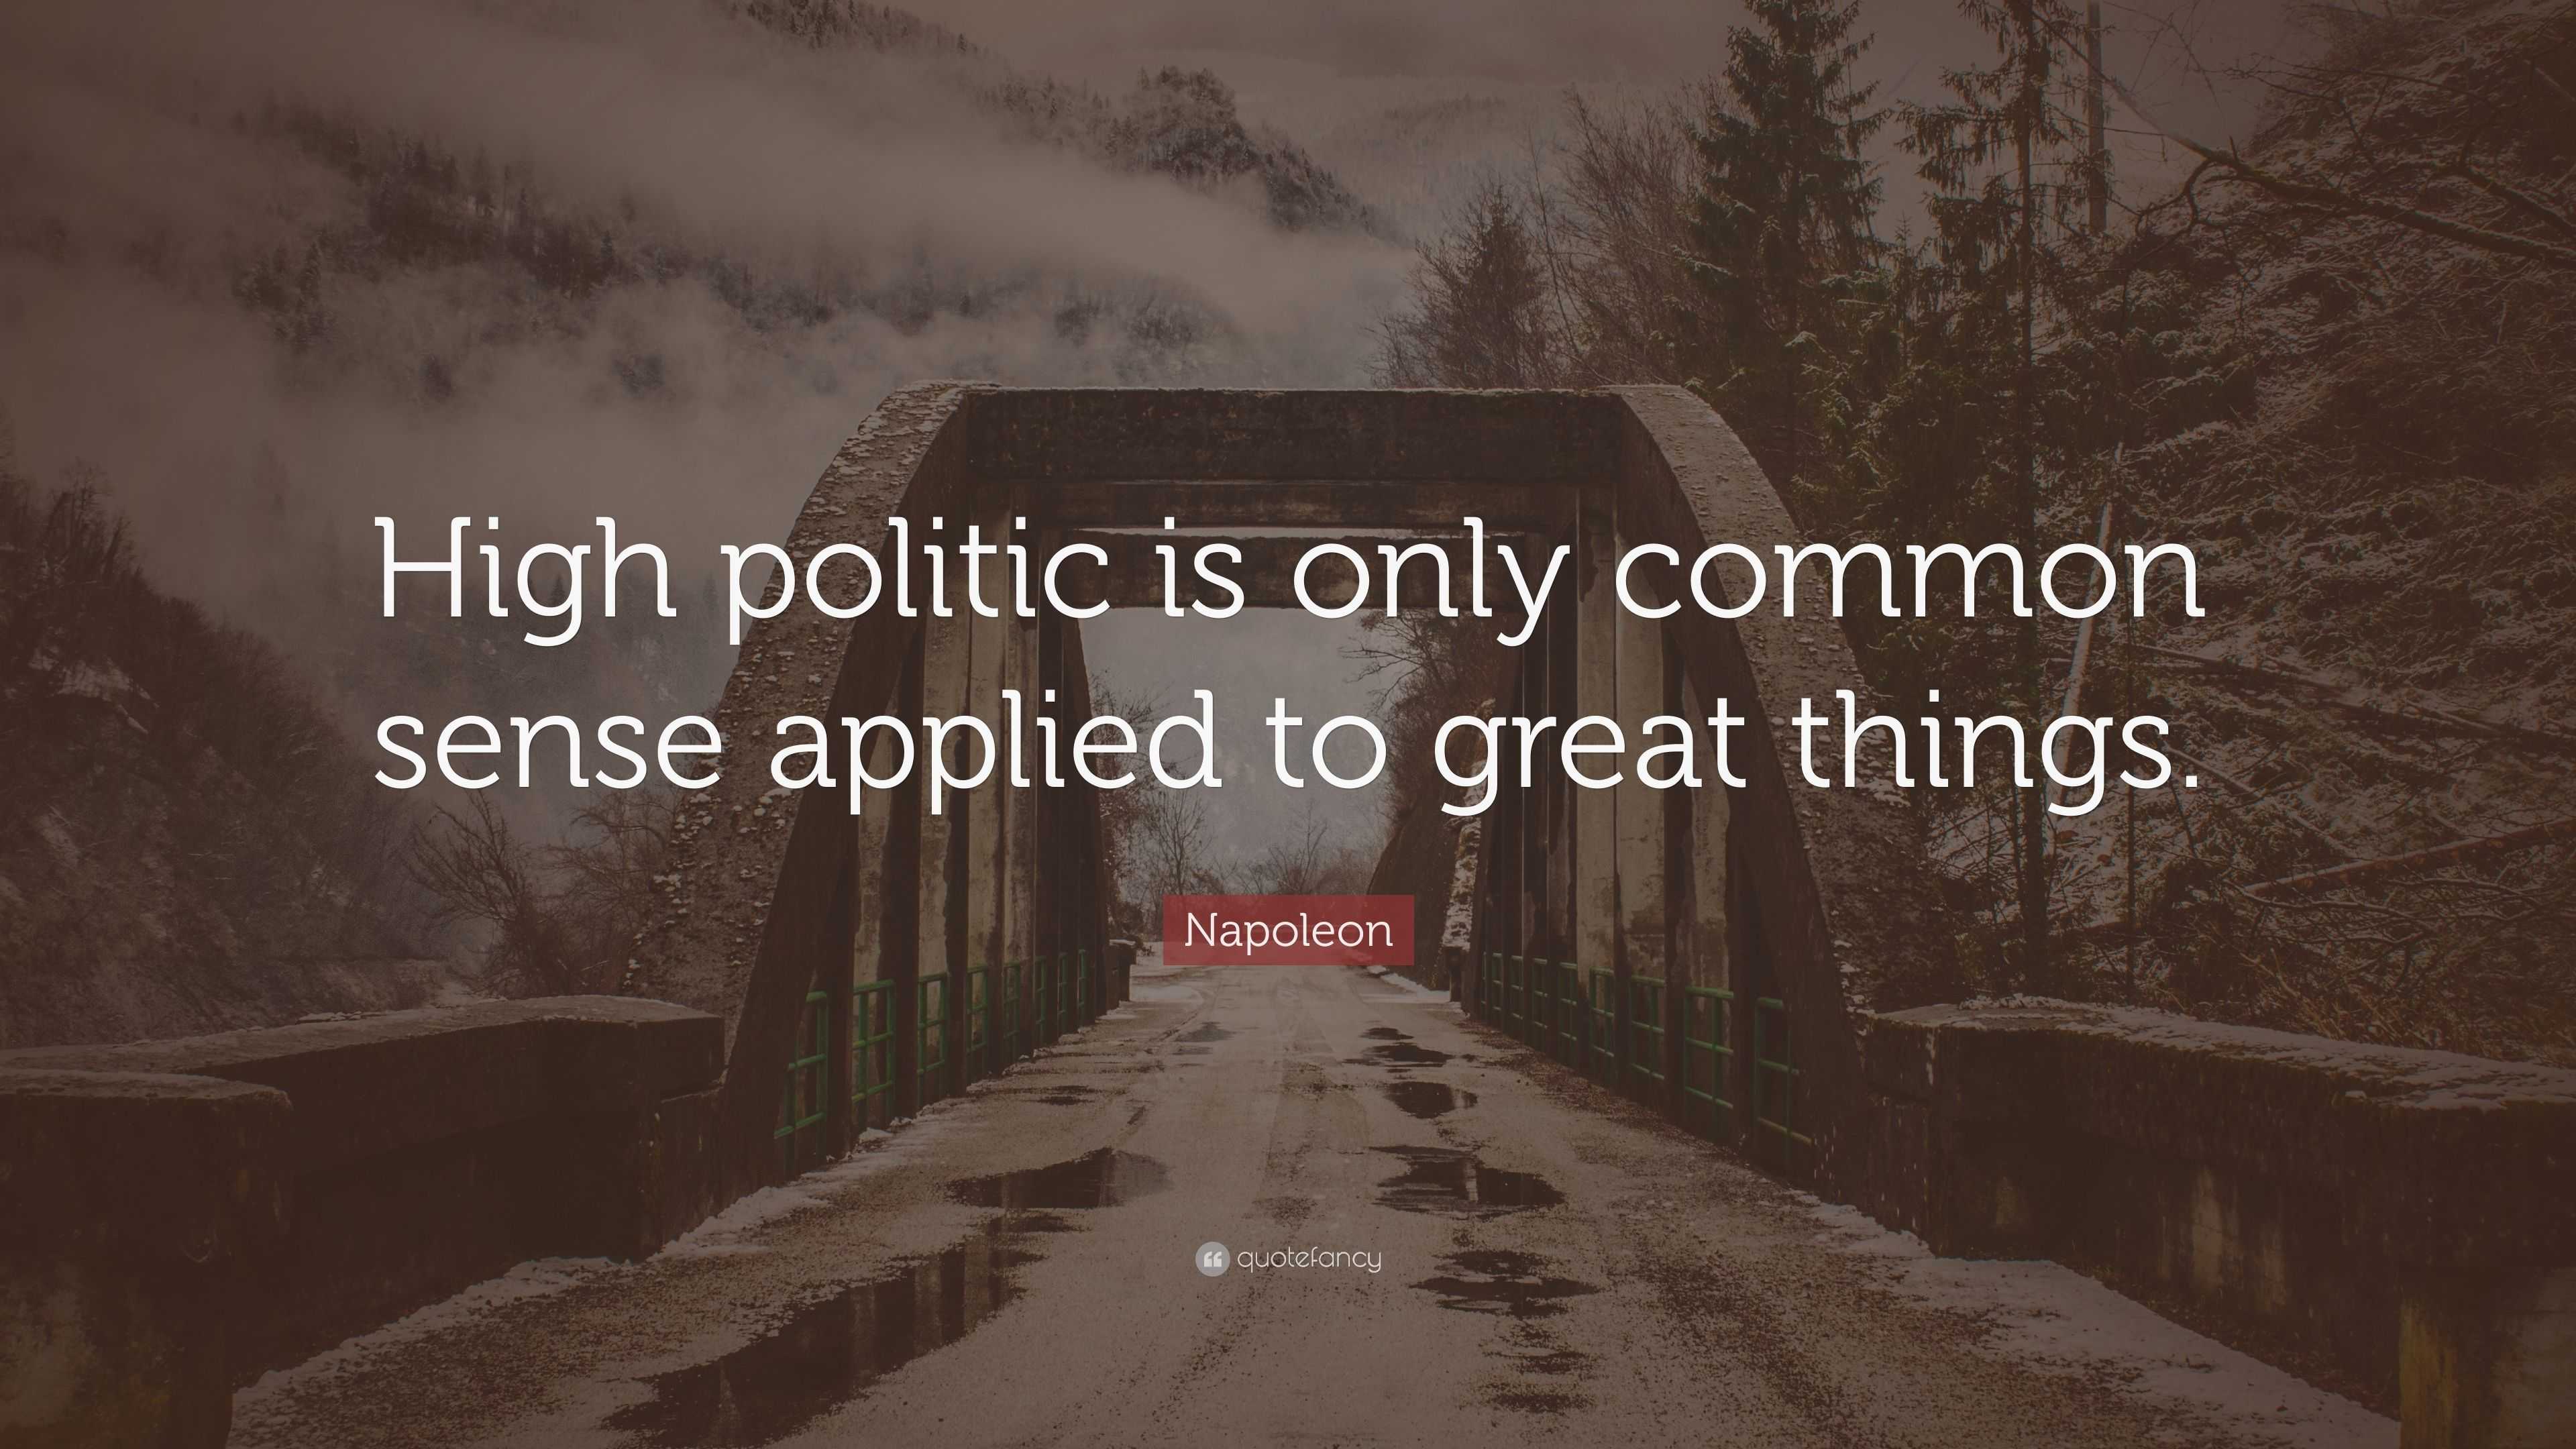 Napoleon Quote “High politic is only common sense applied to great